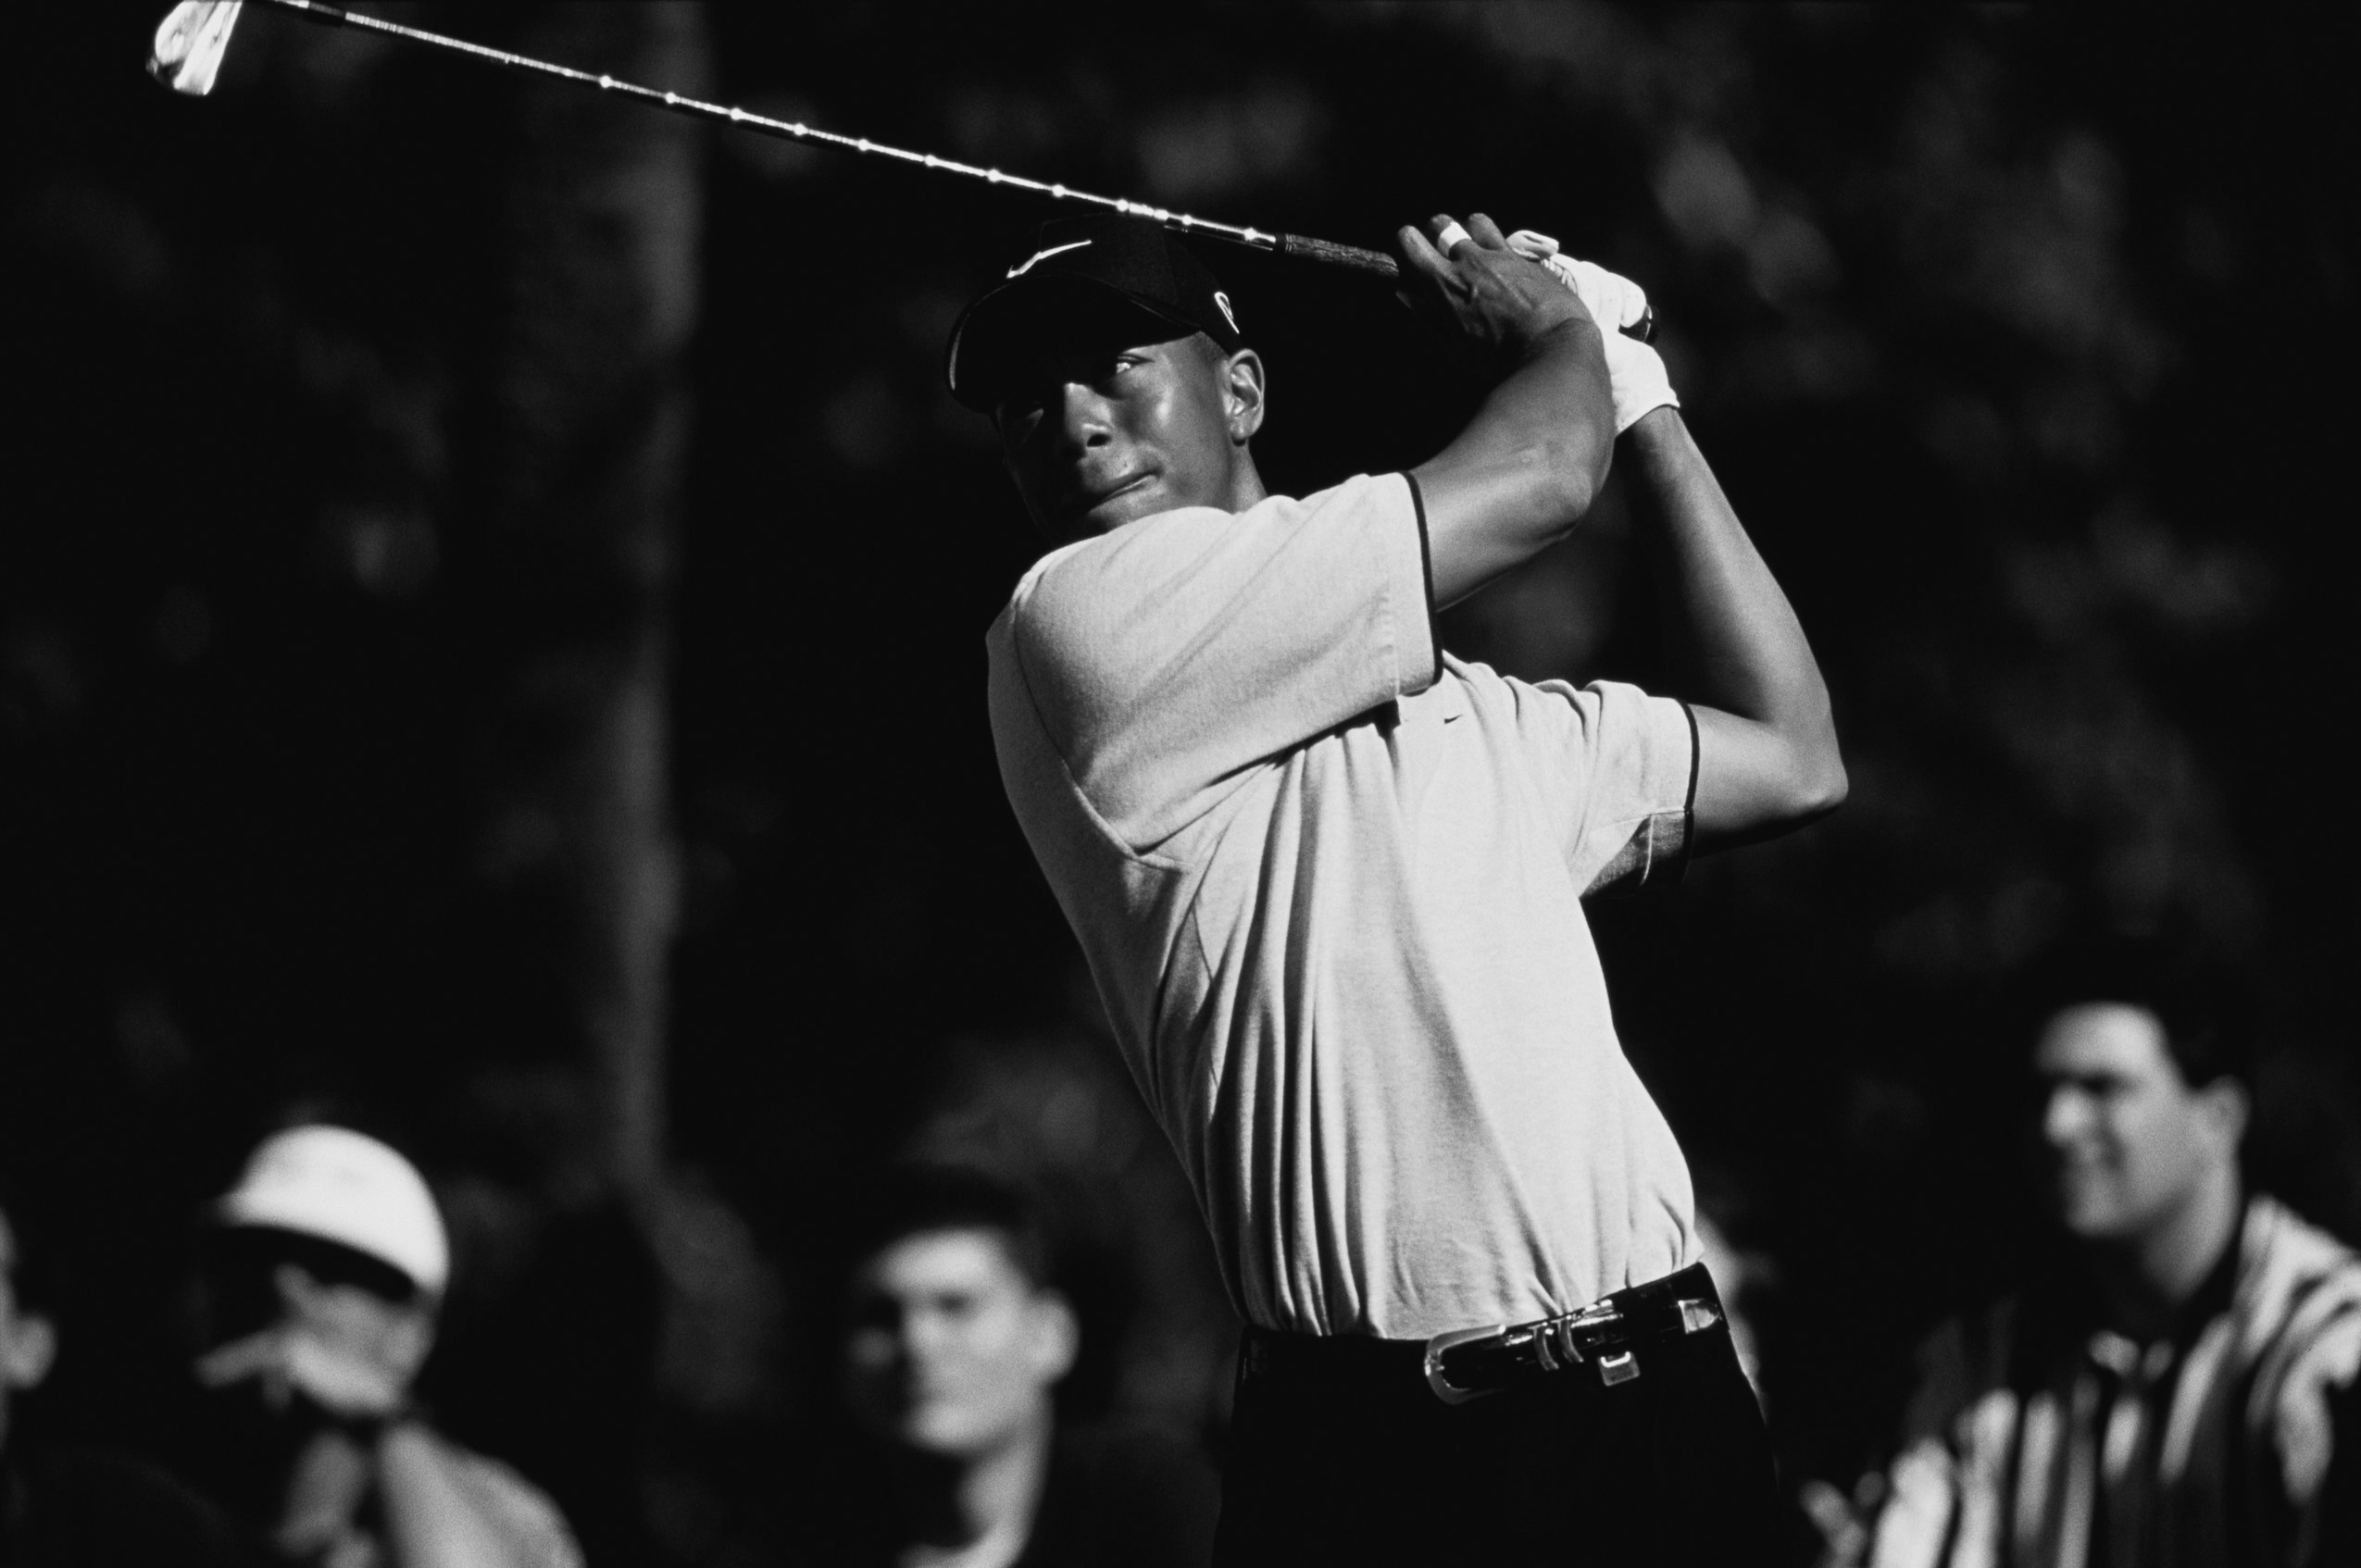 1998, Miami, Florida, USA --- Professional golfer Tiger Woods swings his golf club during the 1998 Doral Open. --- Image by © Duomo/CORBIS